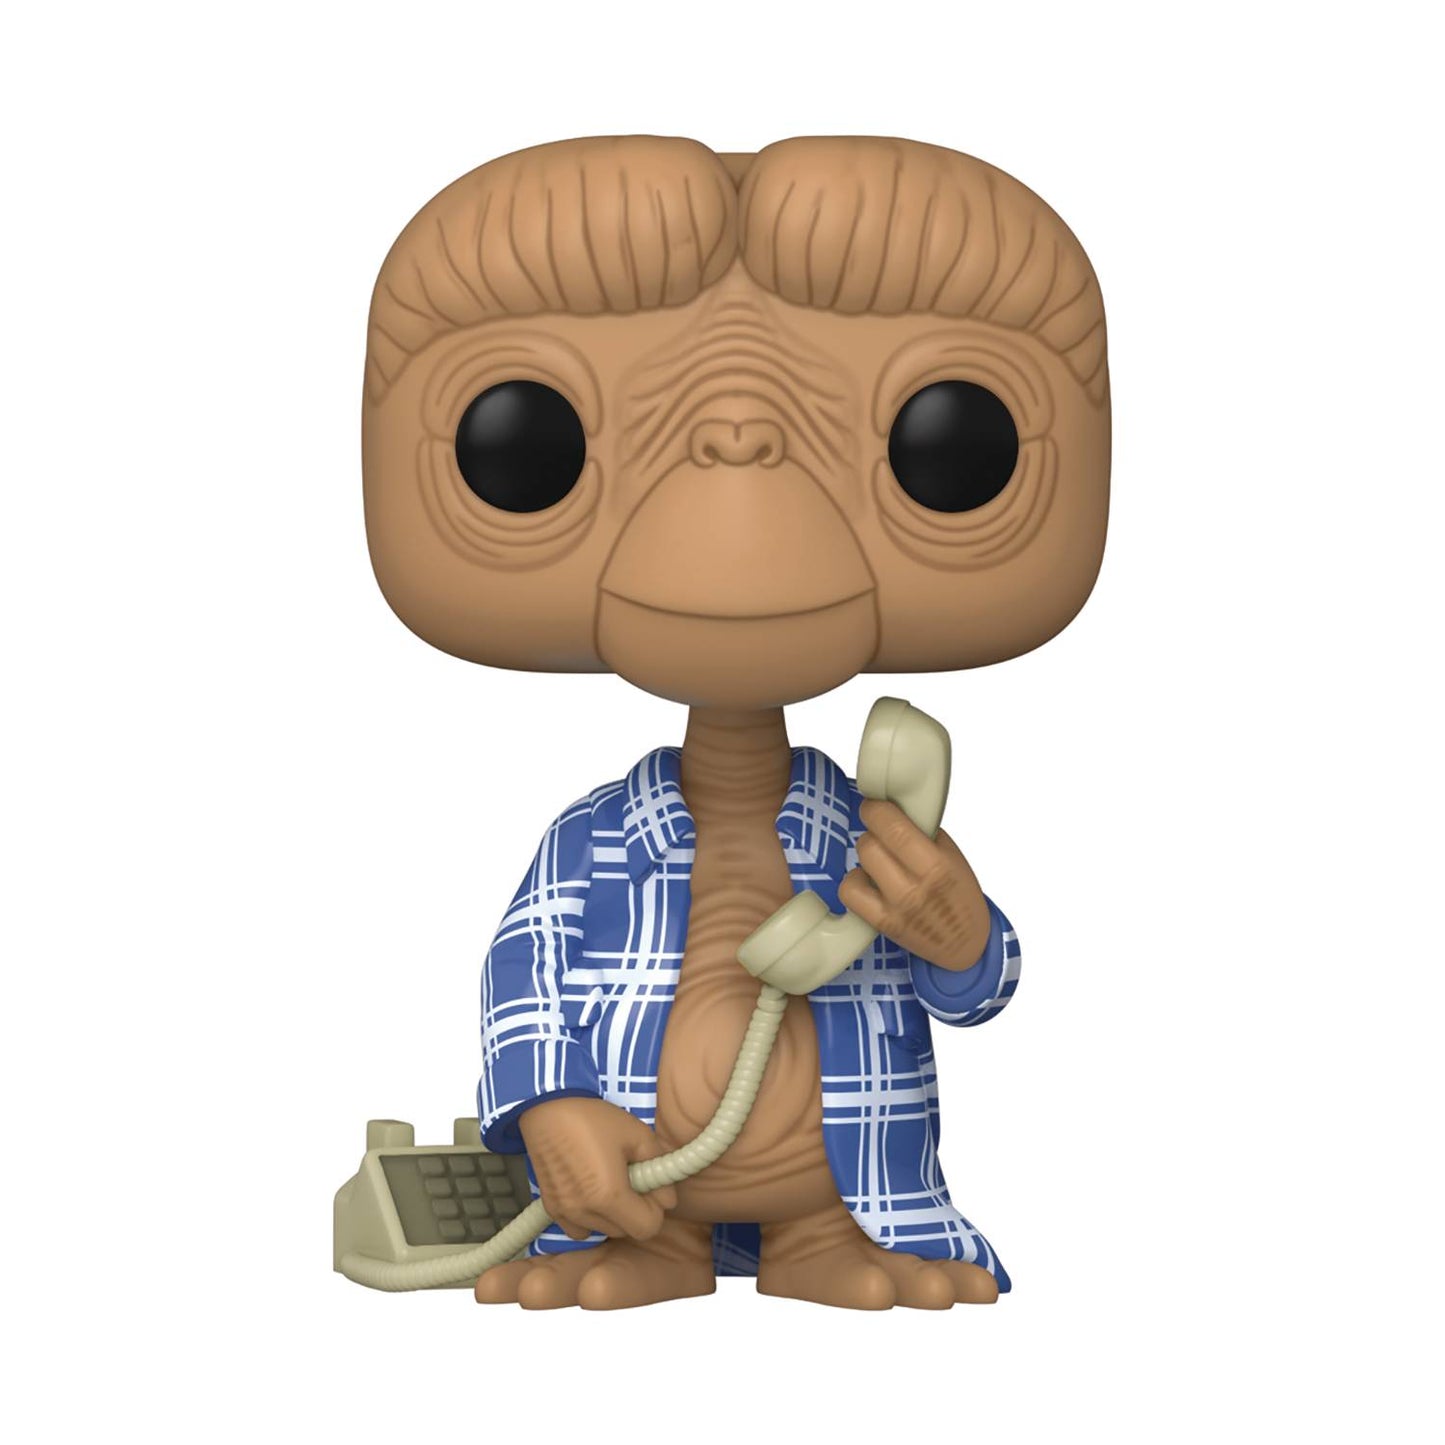 POP MOVIES ET 40TH ET IN FLANNEL VIN FIG